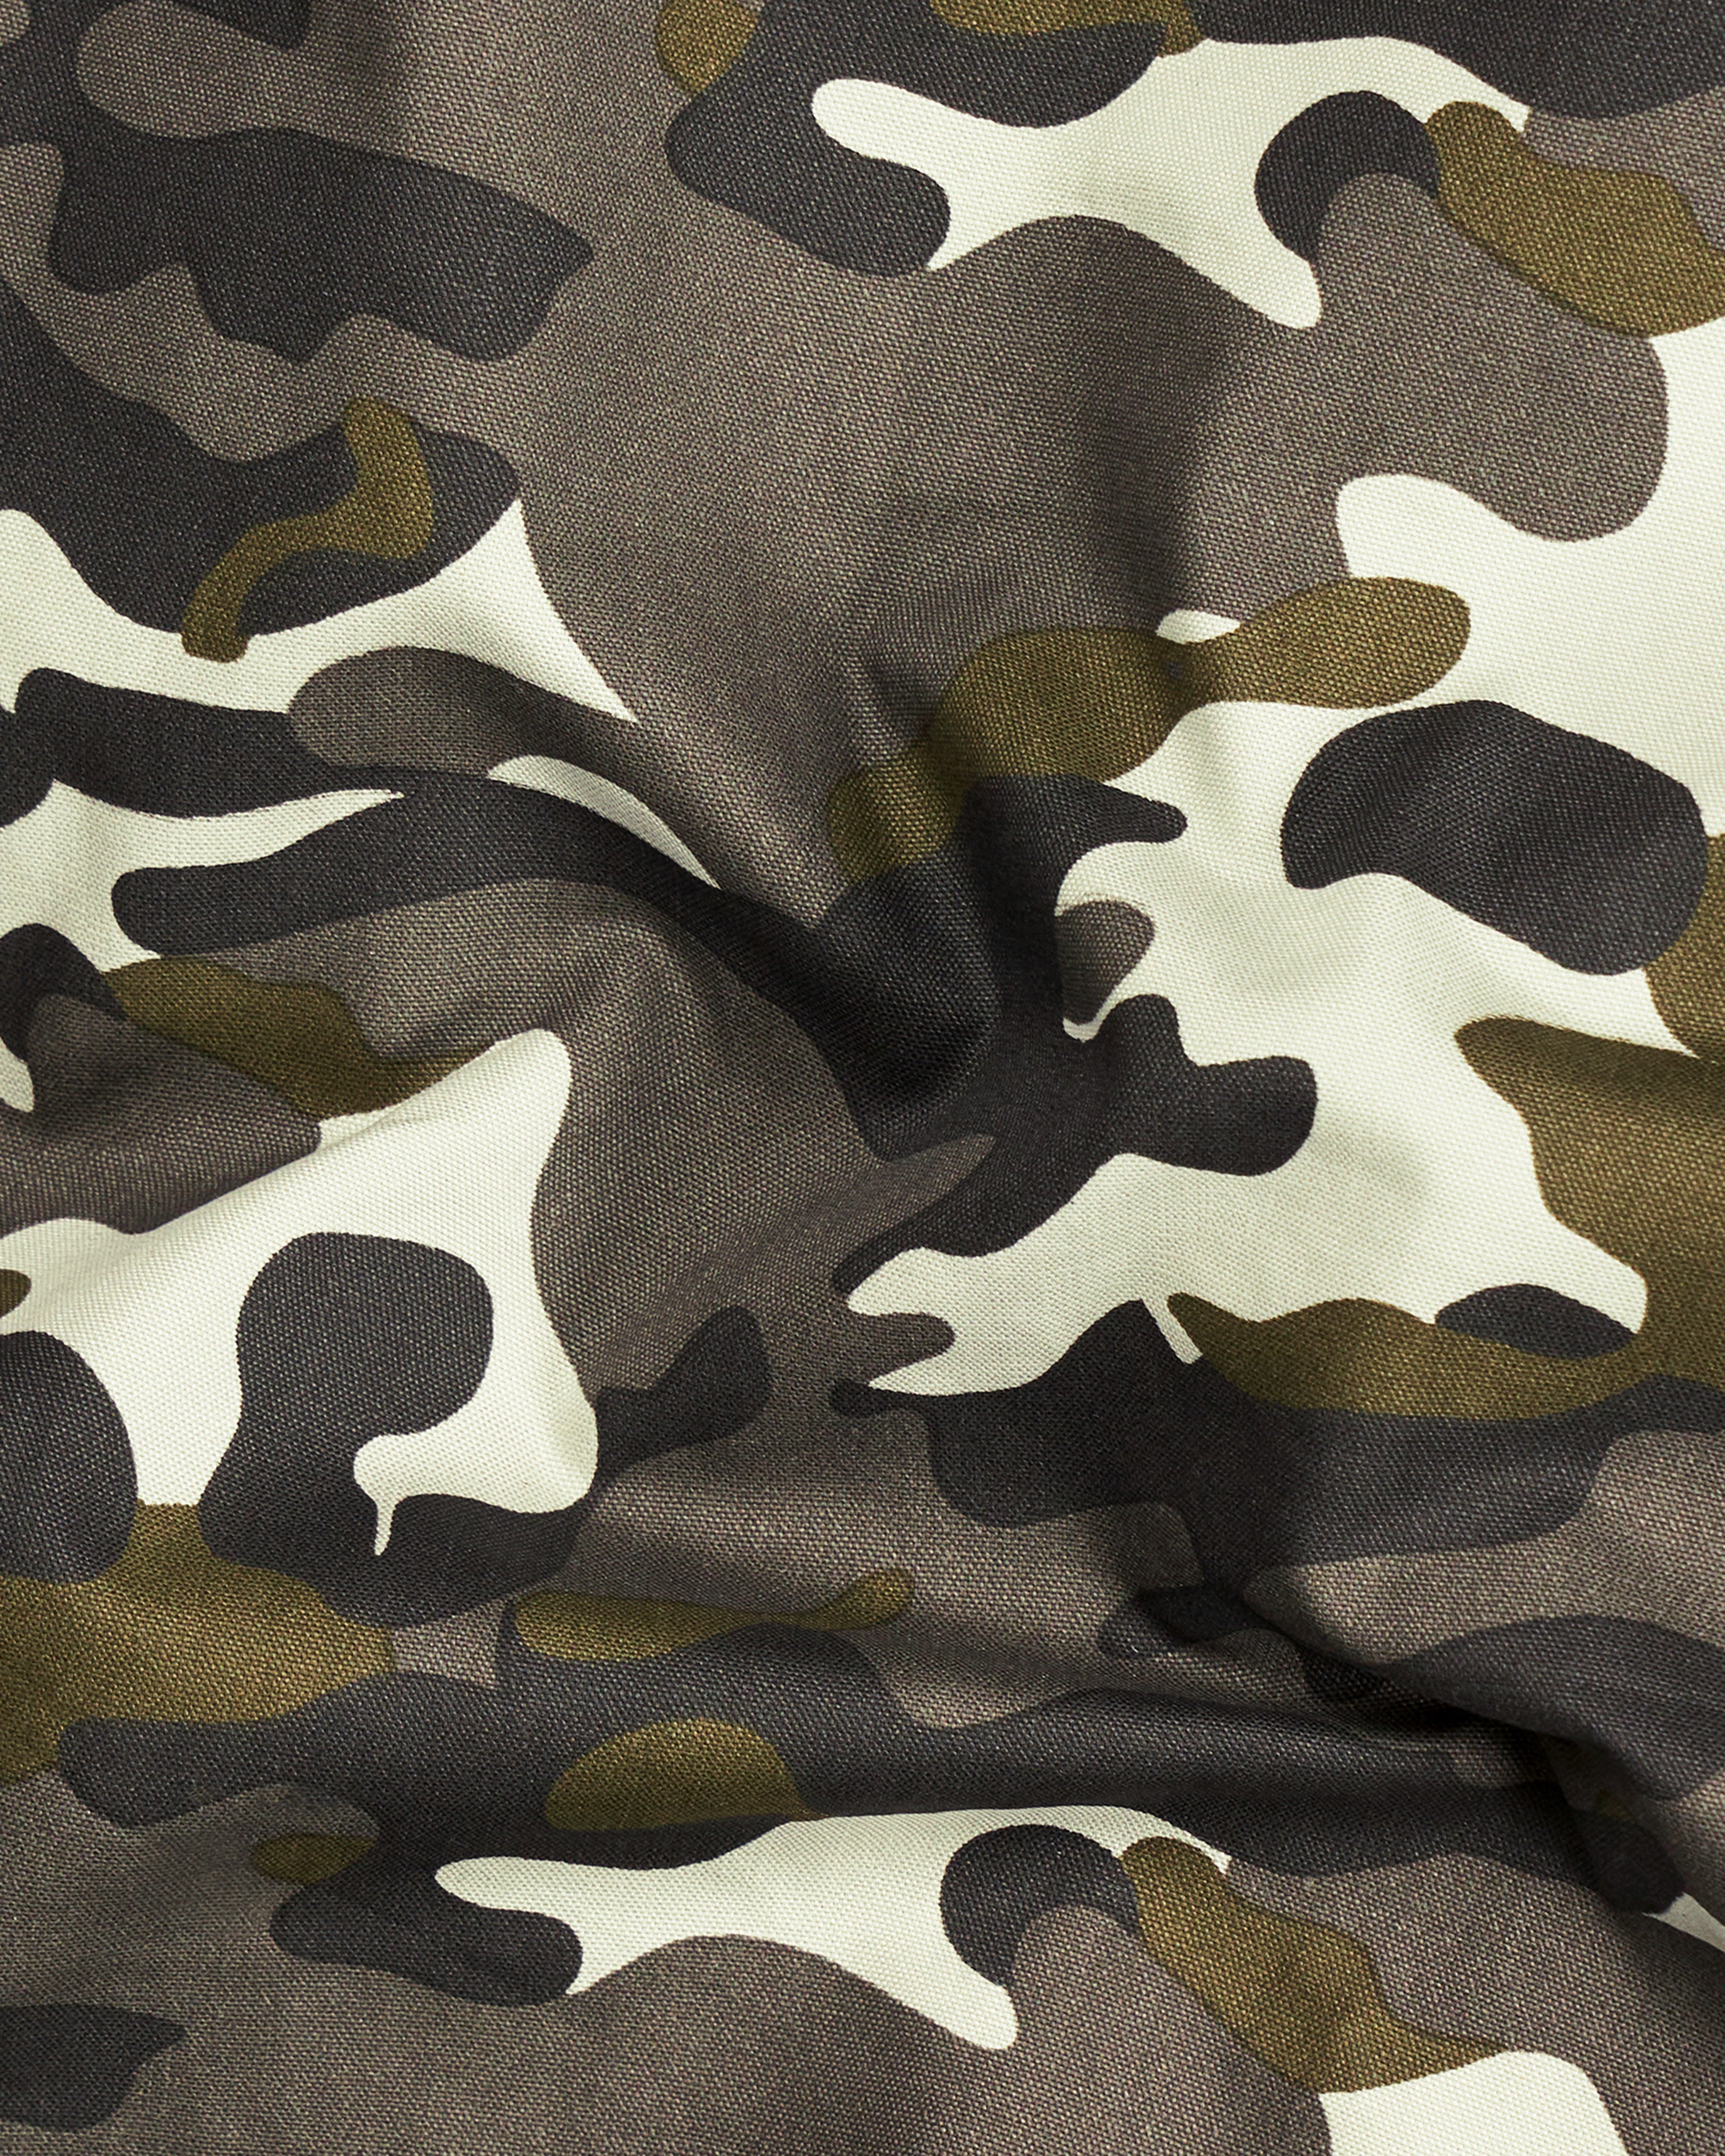 Jade Black with Birch Brown and Eggshell Cream Camouflage Royal Oxford Half Sleeves Designer Shirt